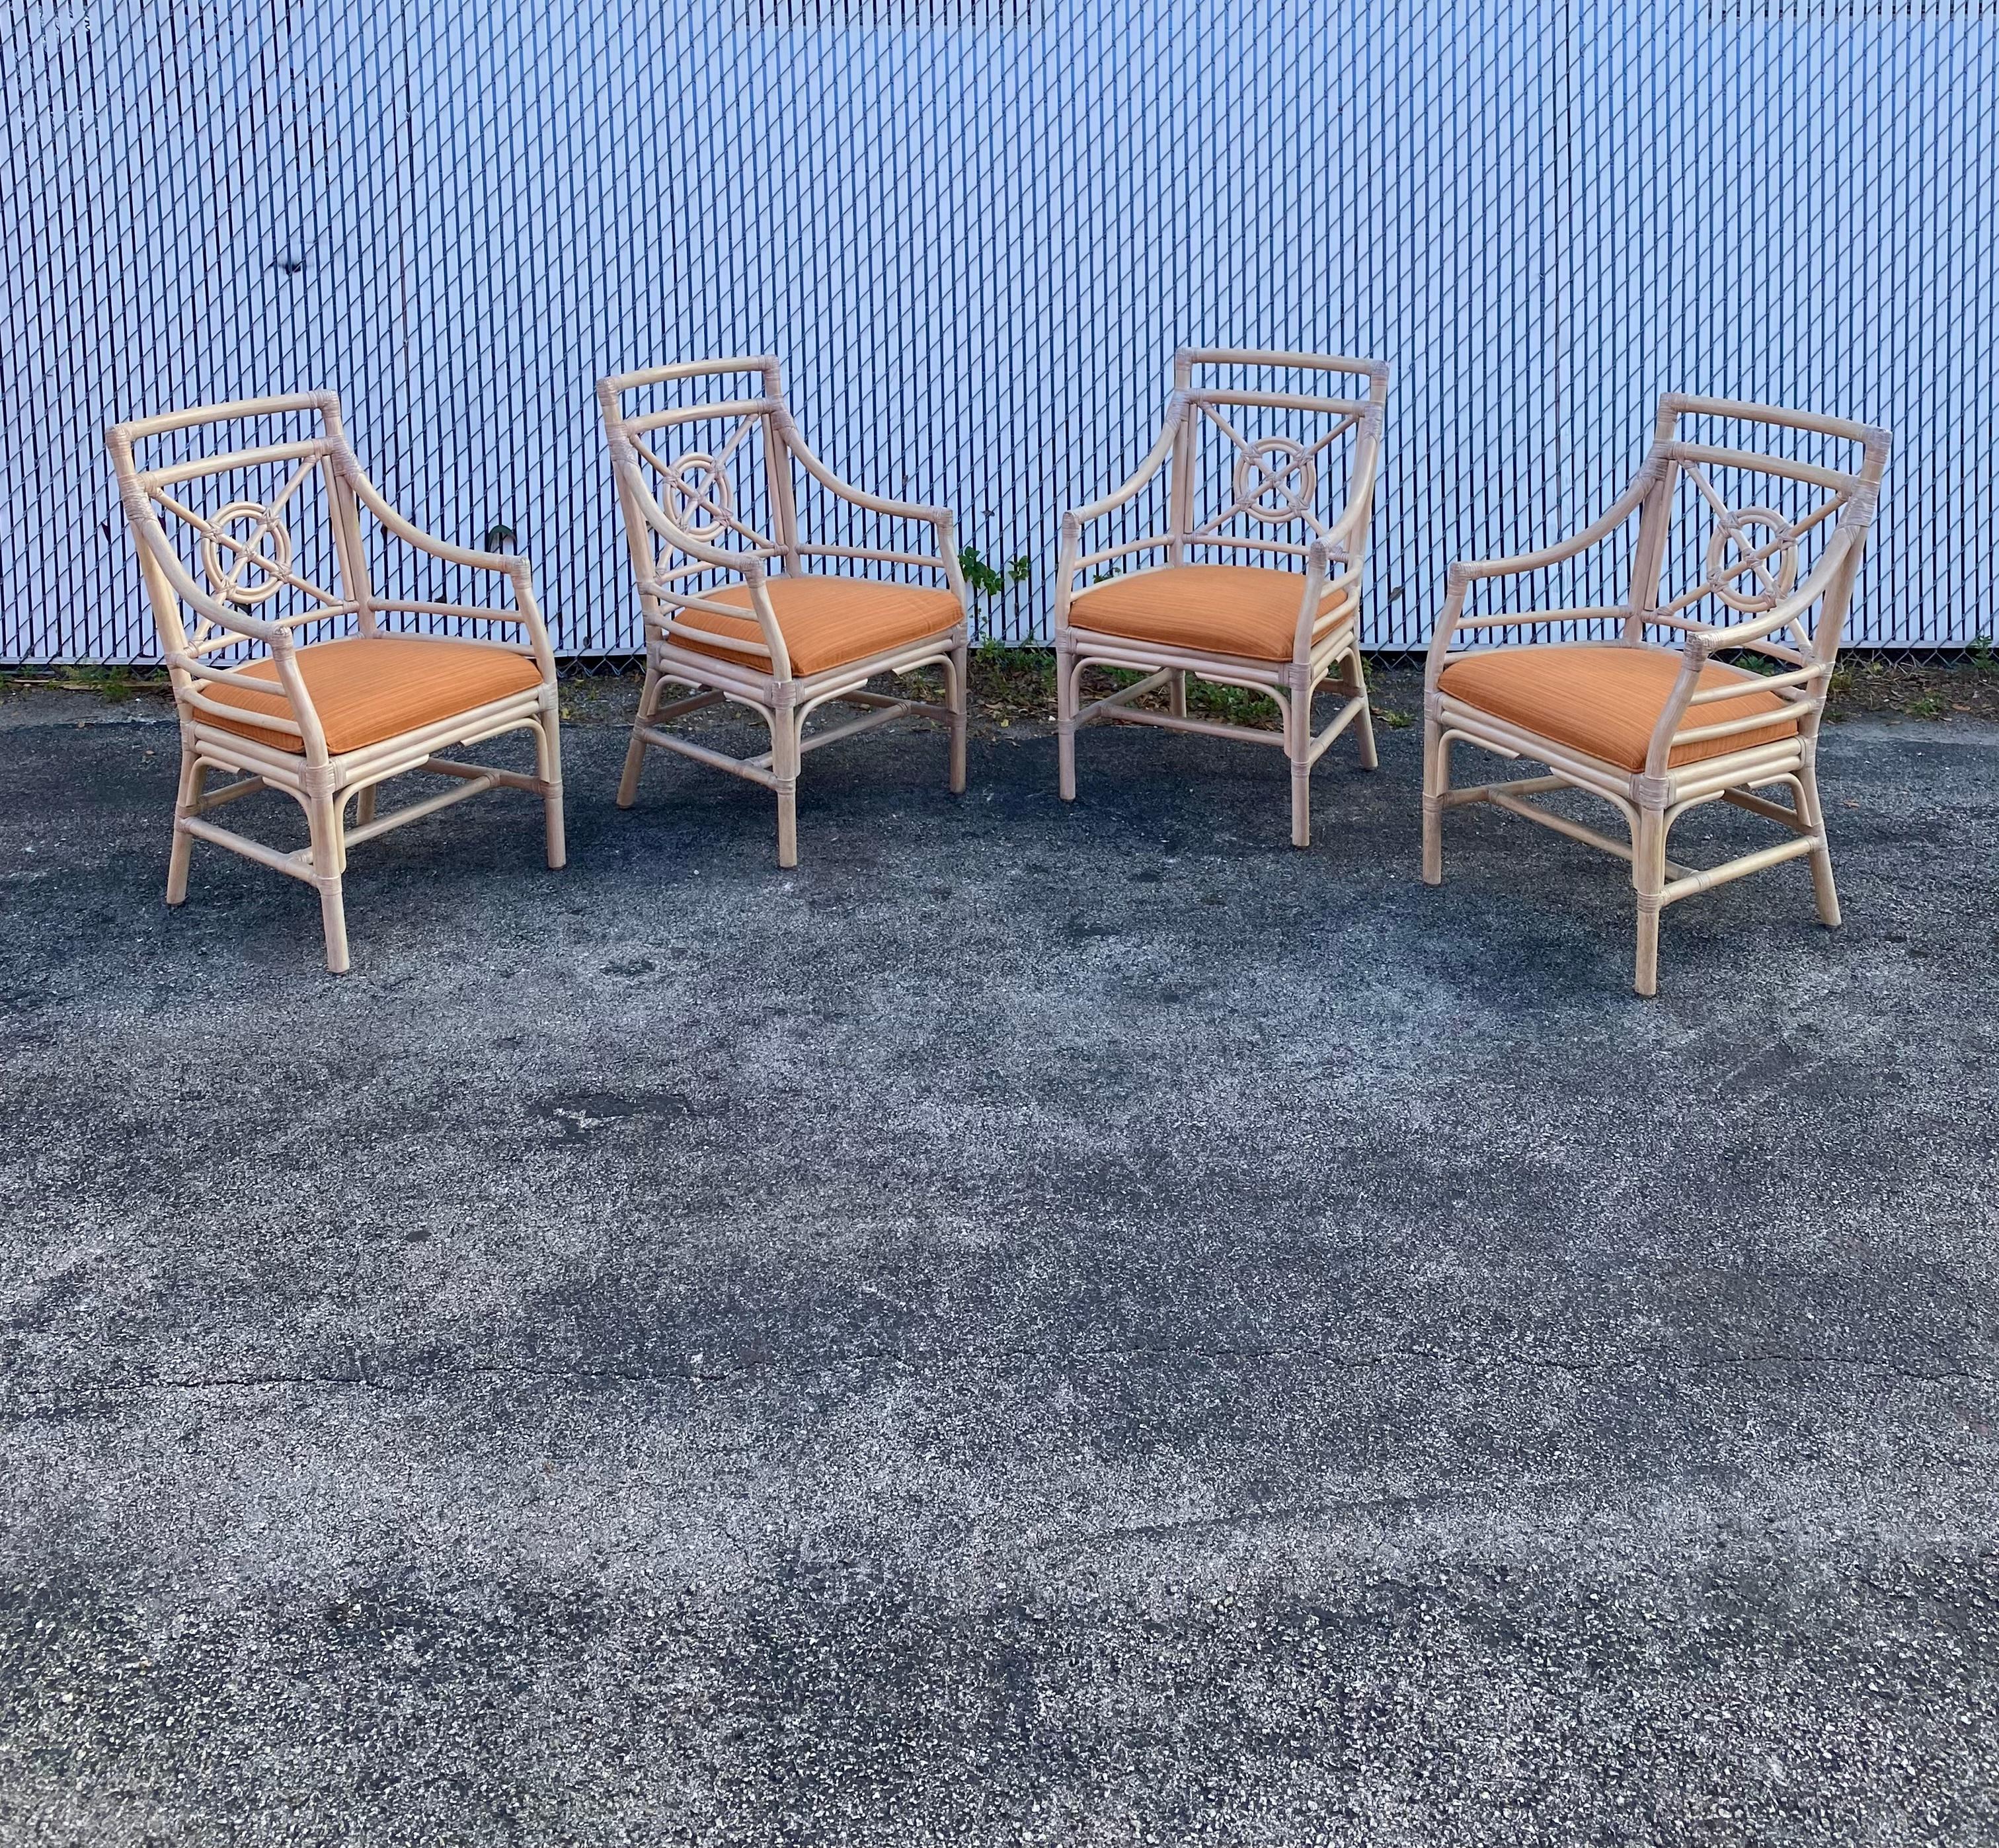 Handsome set of four rattan dining armchairs crafted in the manner and style of McGuire. They feature a bullseye target design on the square back splat. Graceful arms conjoin to a generous seat with orange upholstery. Arms measure 25 inches high.